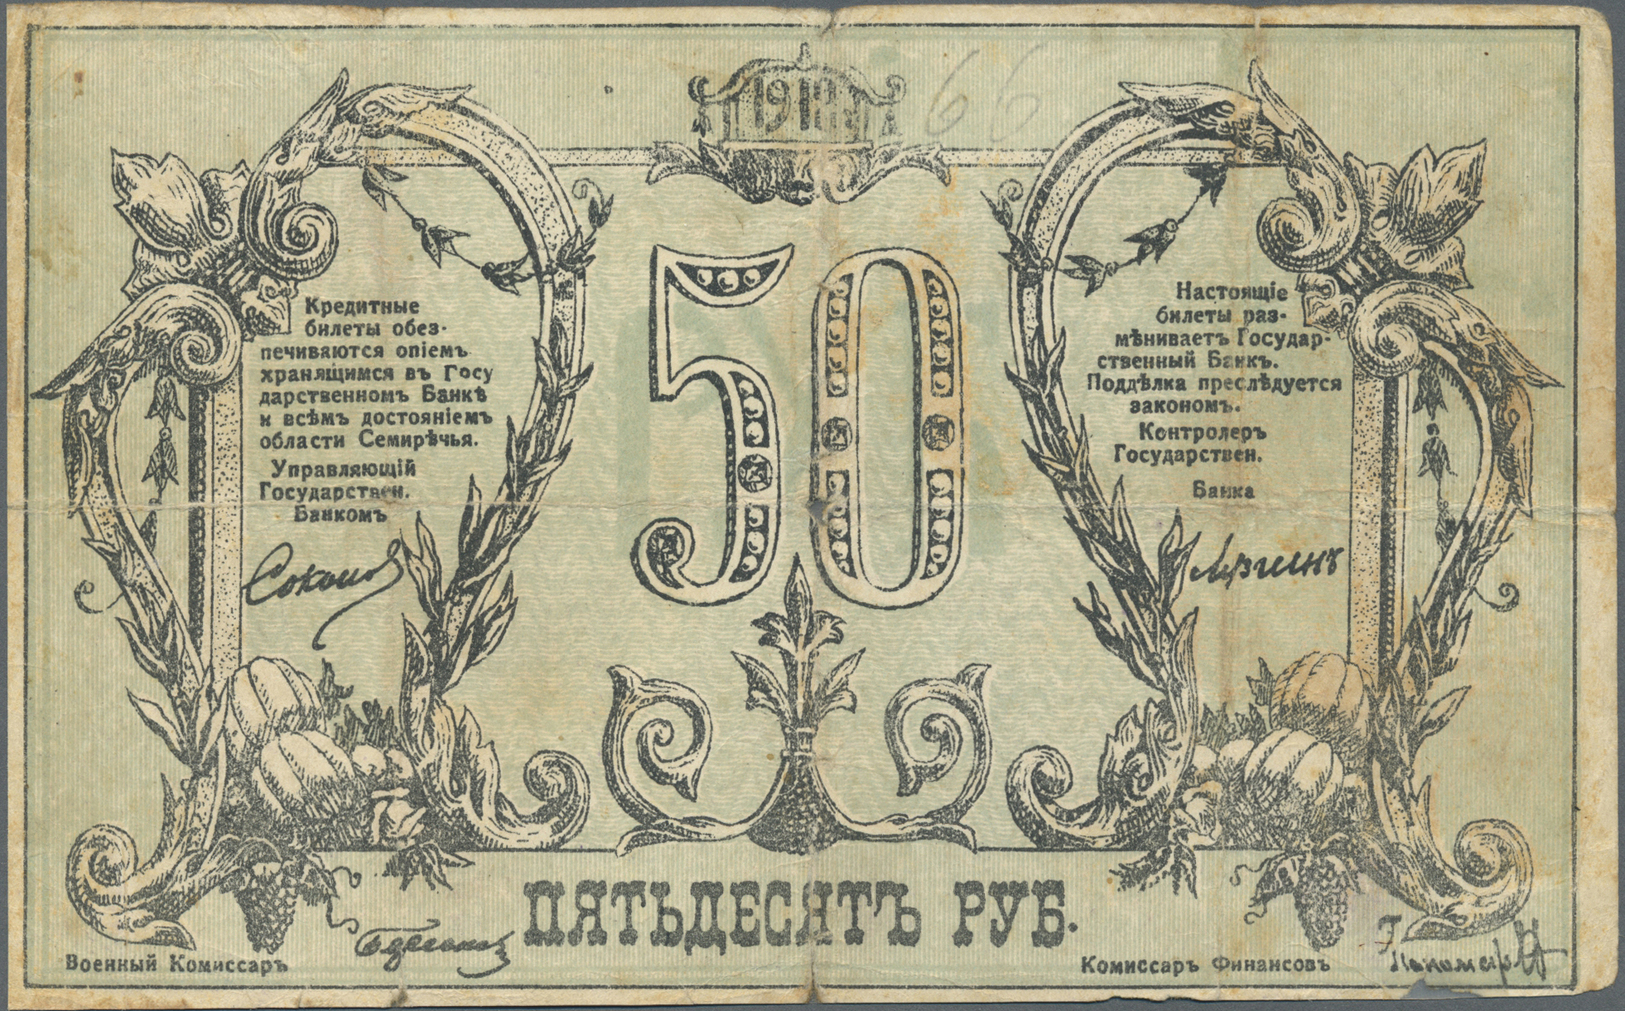 01340 Kazakhstan / Kasachstan: 50 Rubles ND(1918) P. S1123 In Used Condition With Strong Folds, Light Staining In Paper, - Kazakhstan